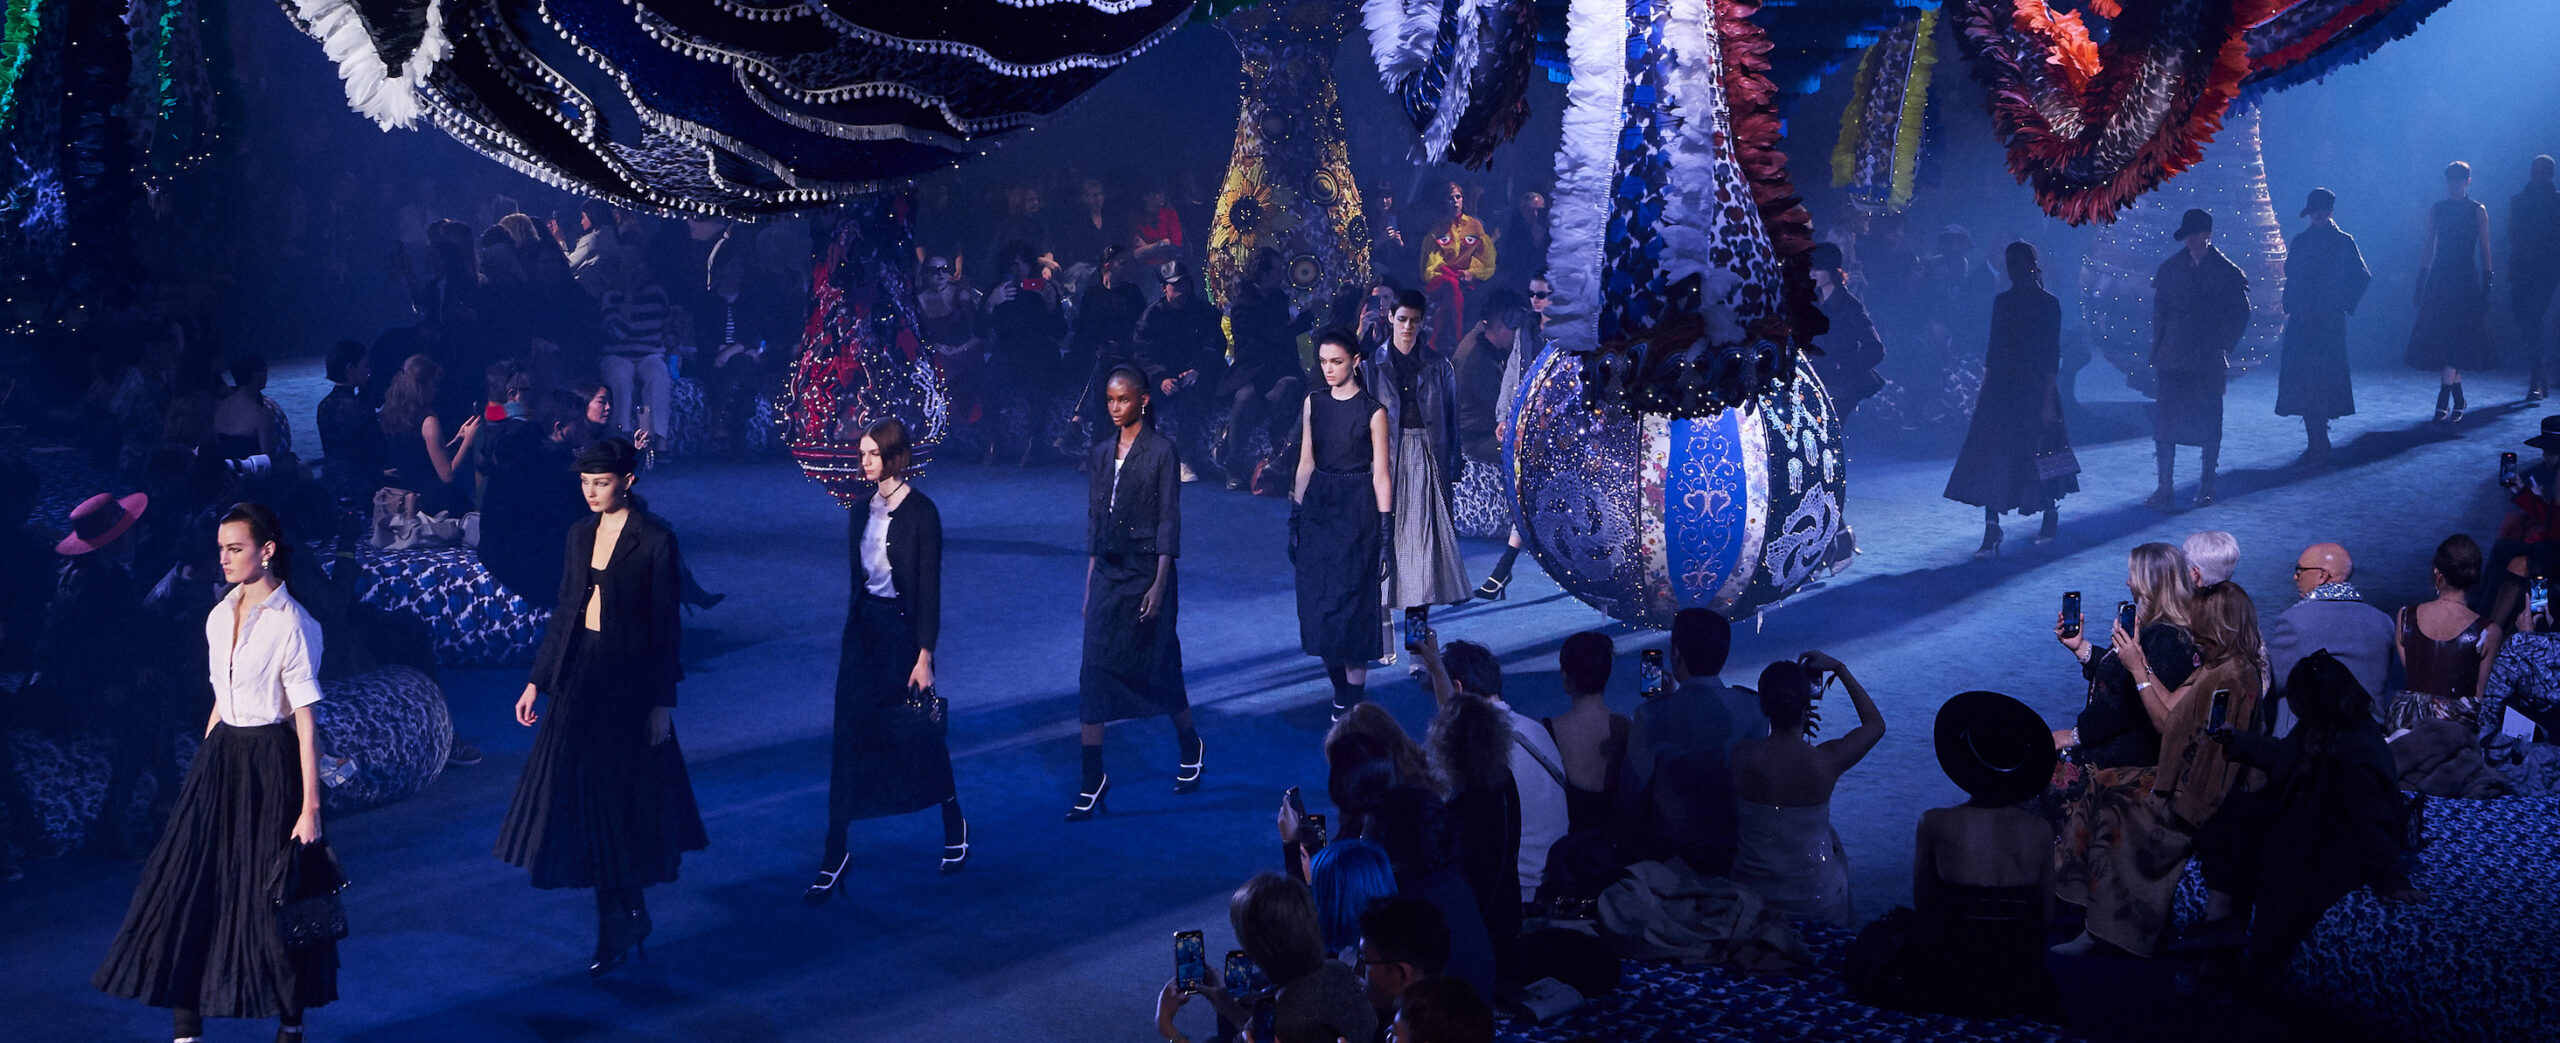 Christian Dior's A/W 2023 Haute Couture Collection Contemplates Fashion  Through the Filter of Art - V Magazine